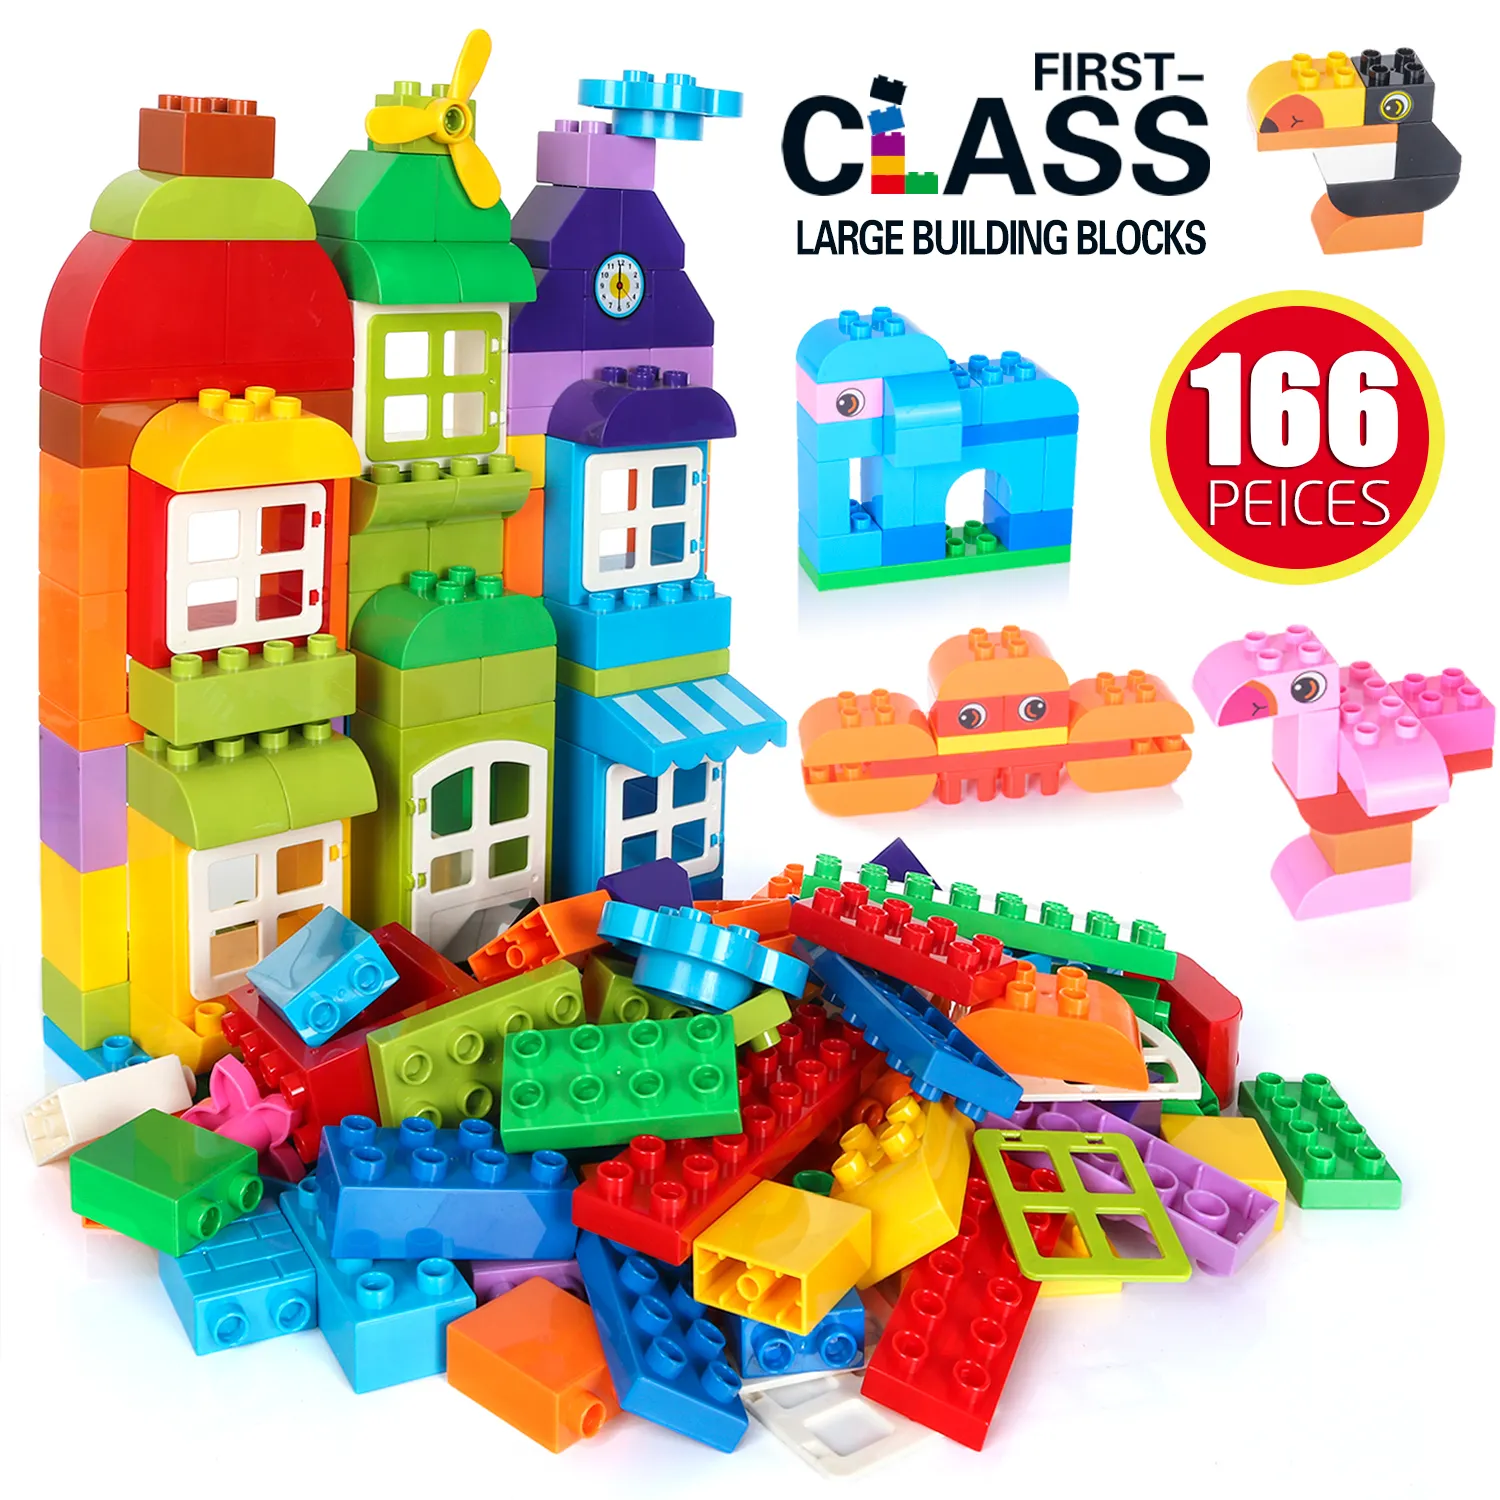 Exercise N Play Large STEM Building Blocks Educational DIY Classic Toy Bricks Compatible Blocks Construction Toys for Kids